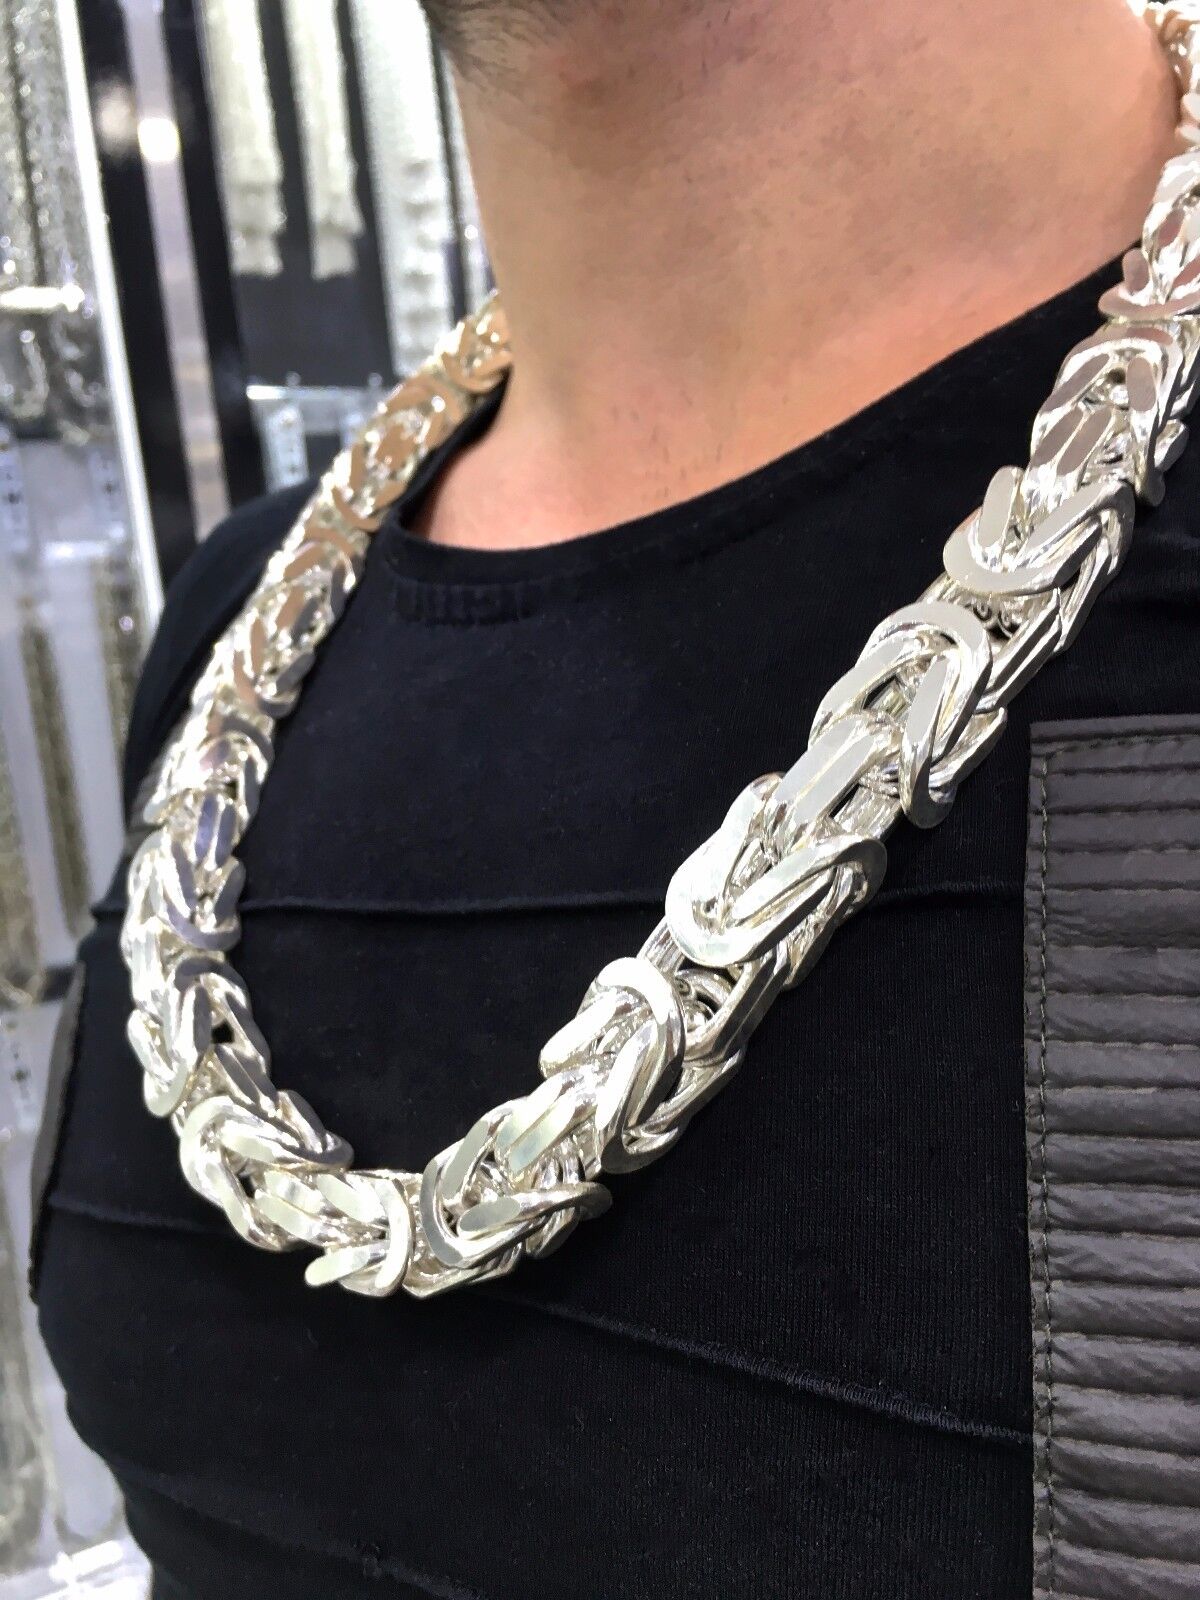 Solid Sterling Silver Byzantine King's Chain Necklace 15x15mm Thick Heavy Unique Men's Jewelry 750+g solid silver